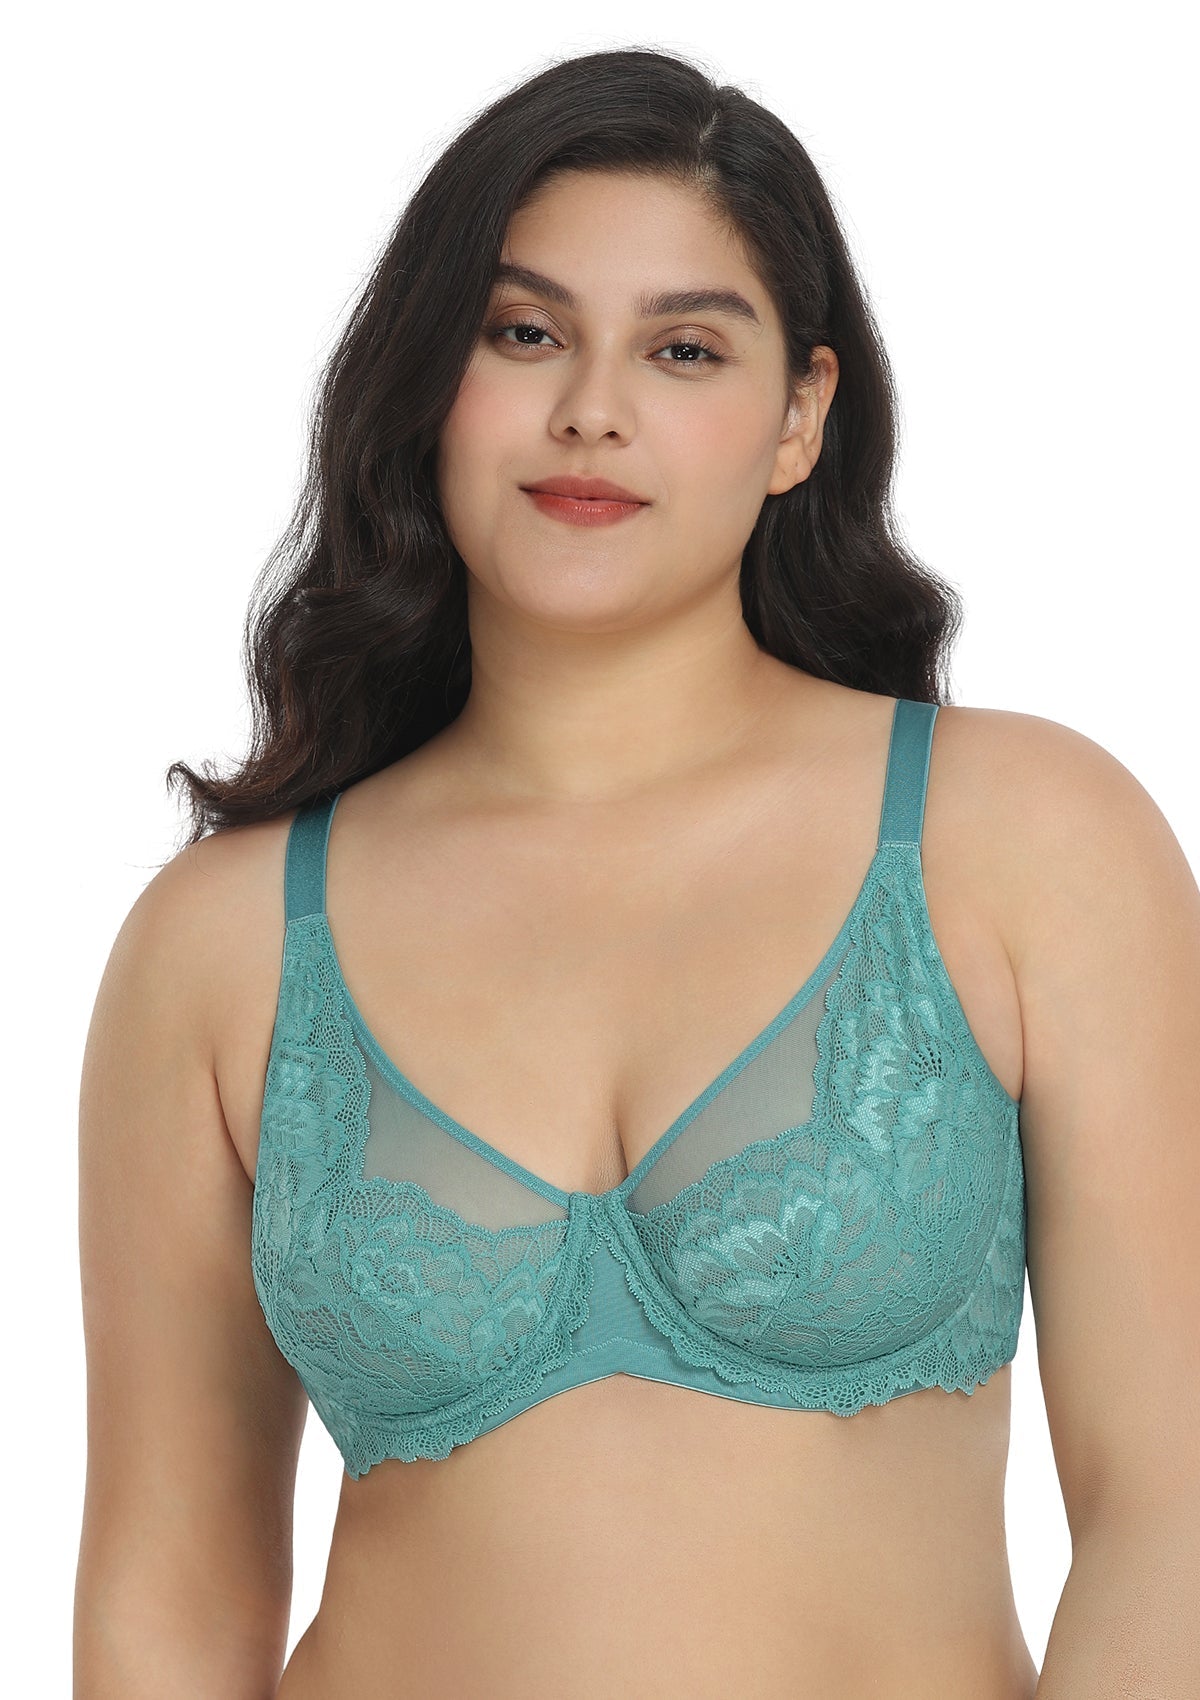 HSIA Paeonia Lace Full Coverage Underwire Non-Padded Uplifting Bra - Light Coral / 42 / D